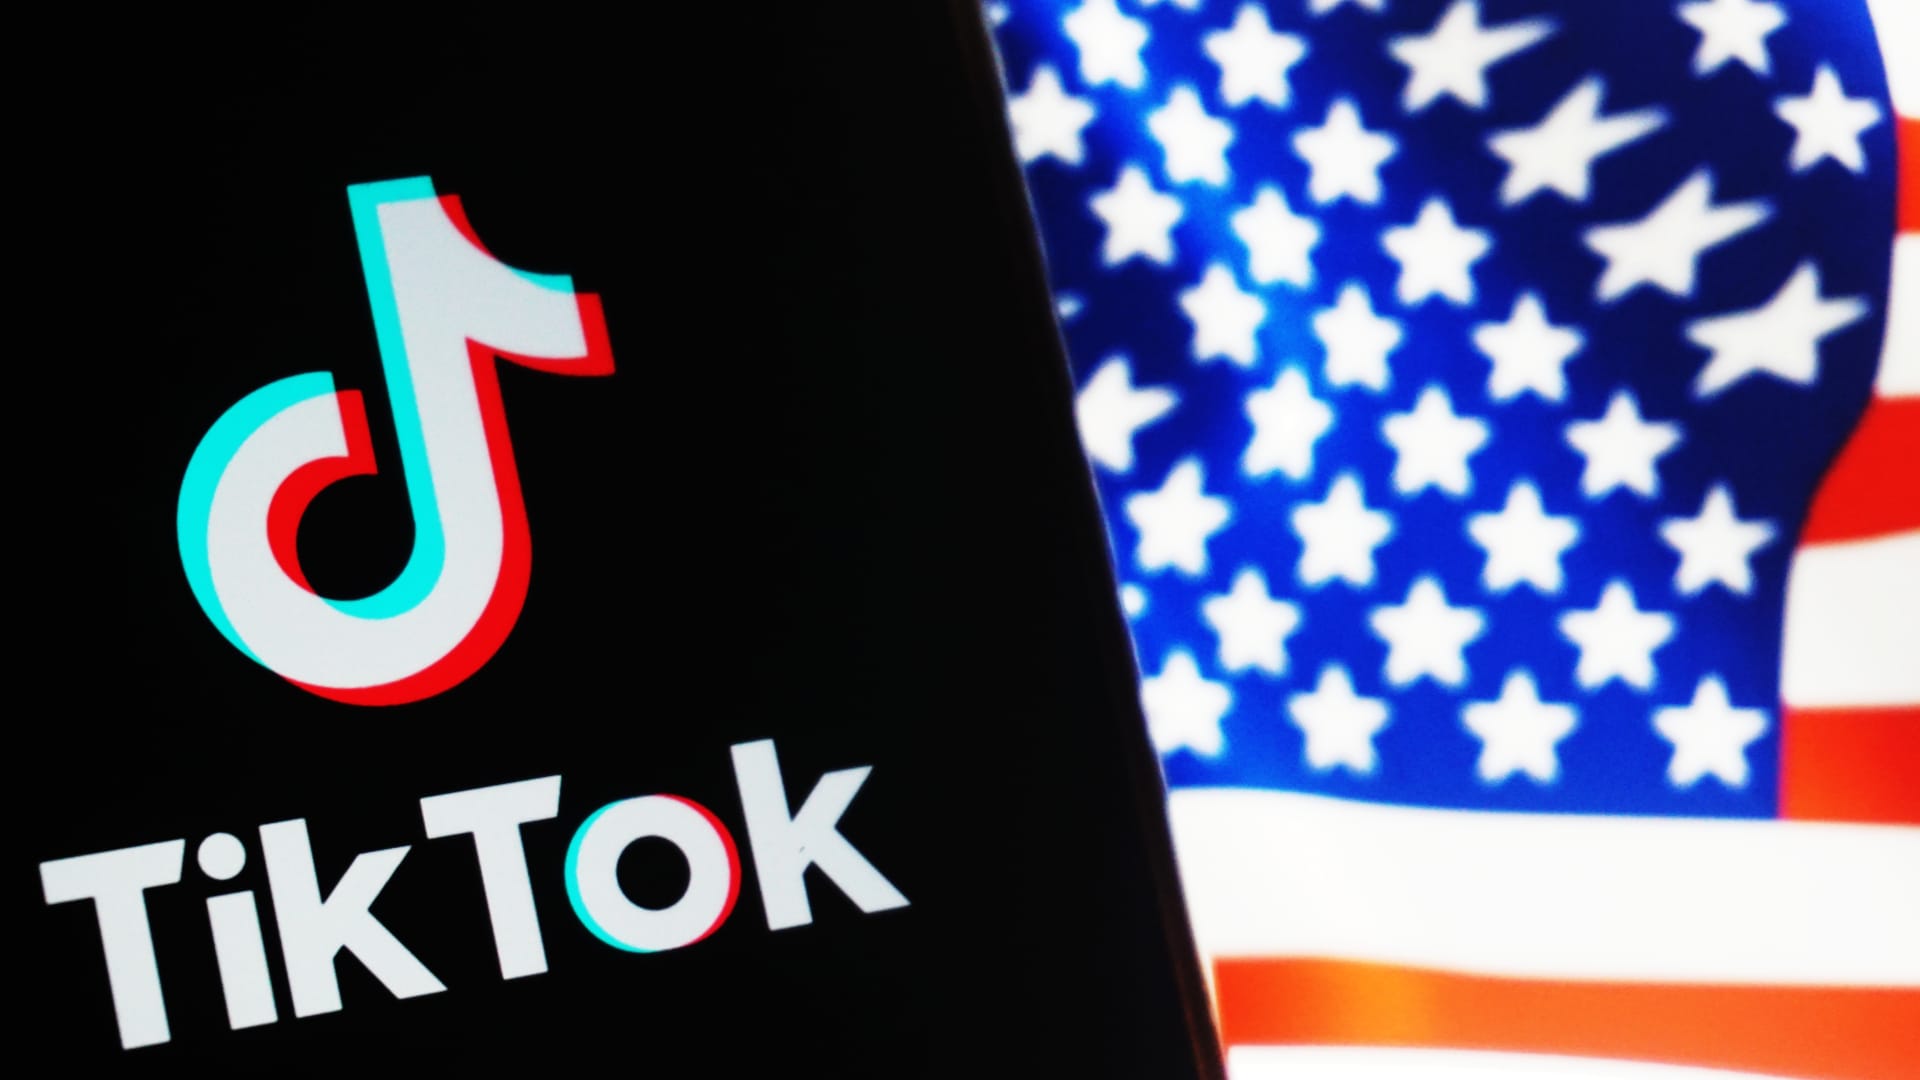 TikTok confirms the U.S. has threatened ban if Chinese parent ByteDance doesn't sell stake - CNBC